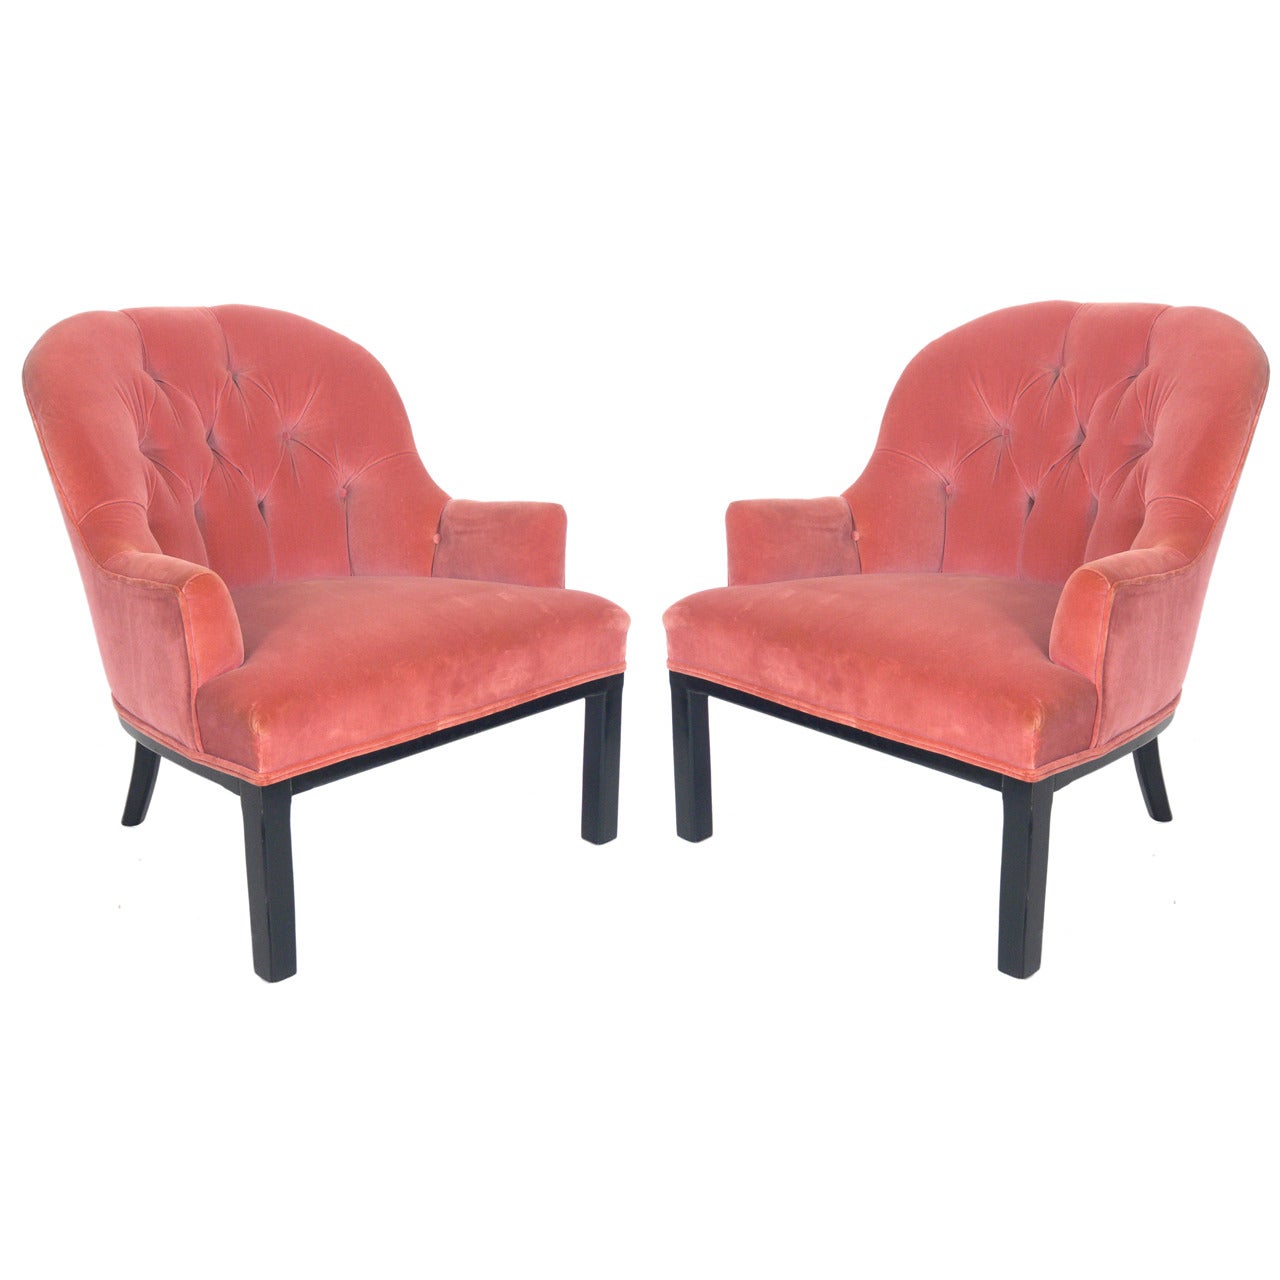 Pair of Button Tufted Lounge Chairs, in the Manner of Edward Wormley for Dunbar